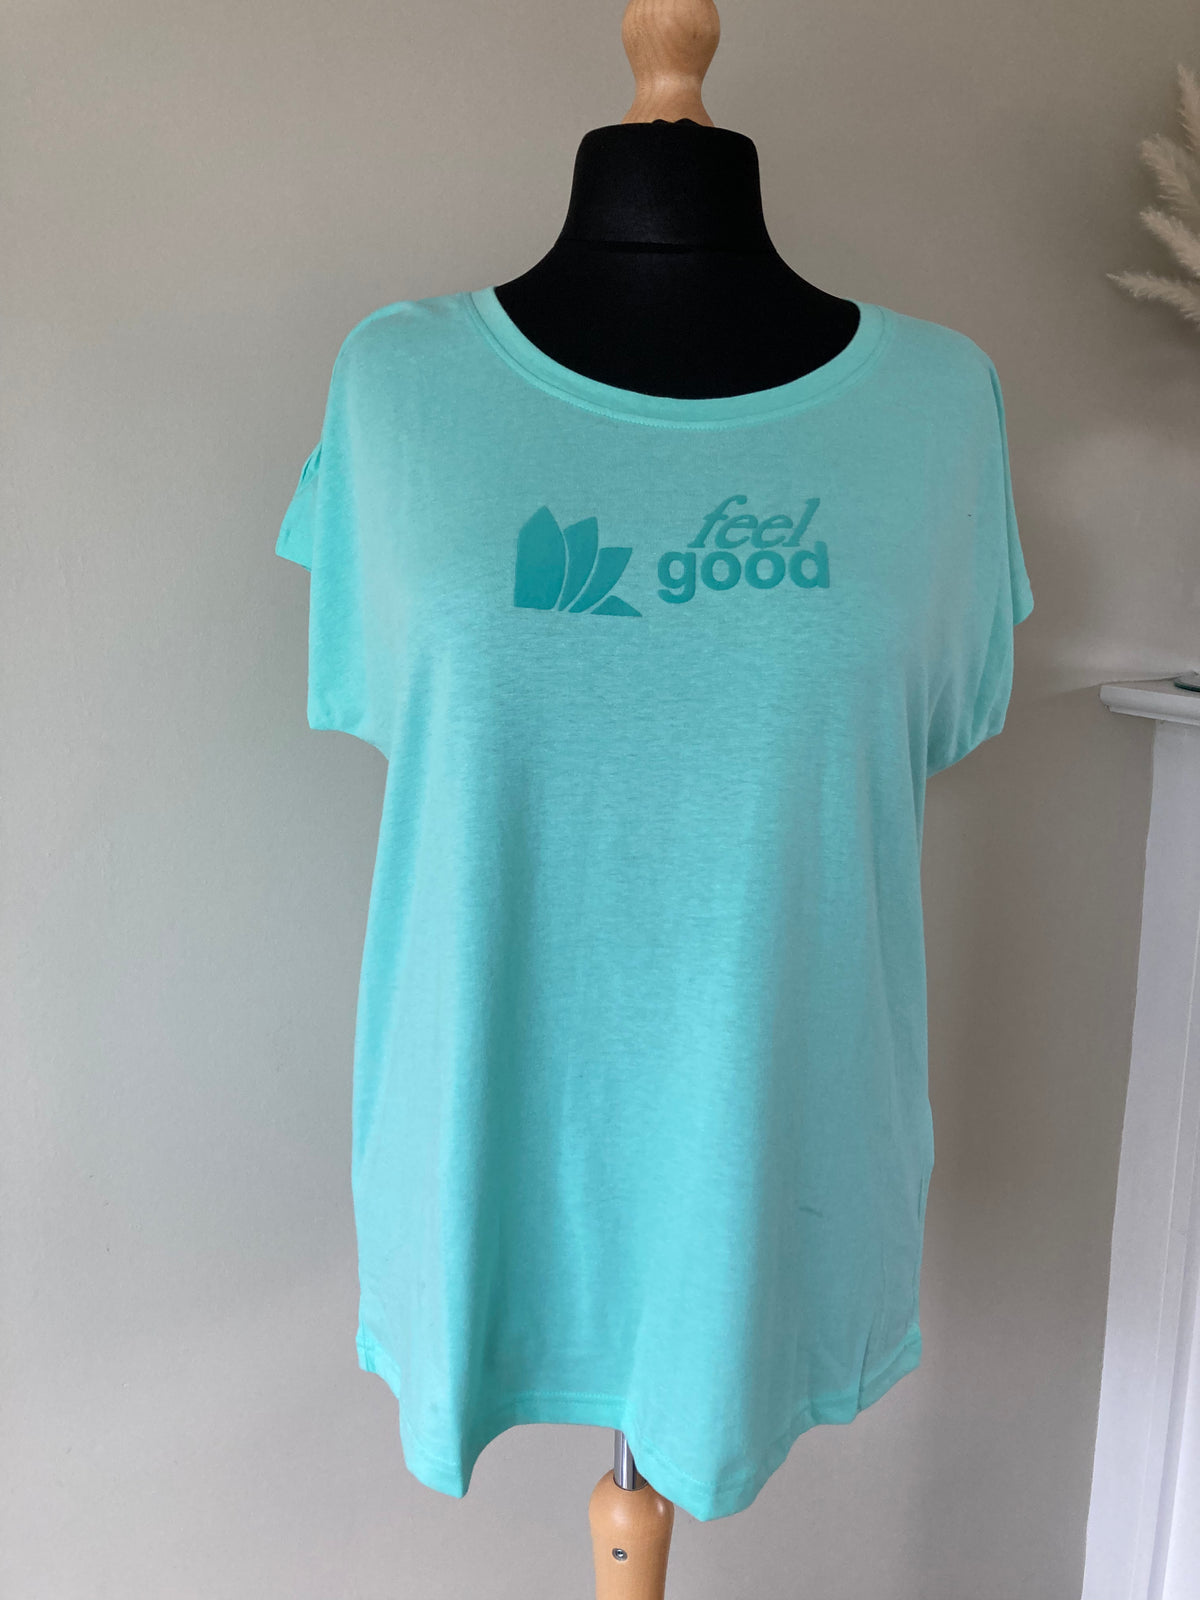 Mint Top by FEEL GOOD - Size 22/24